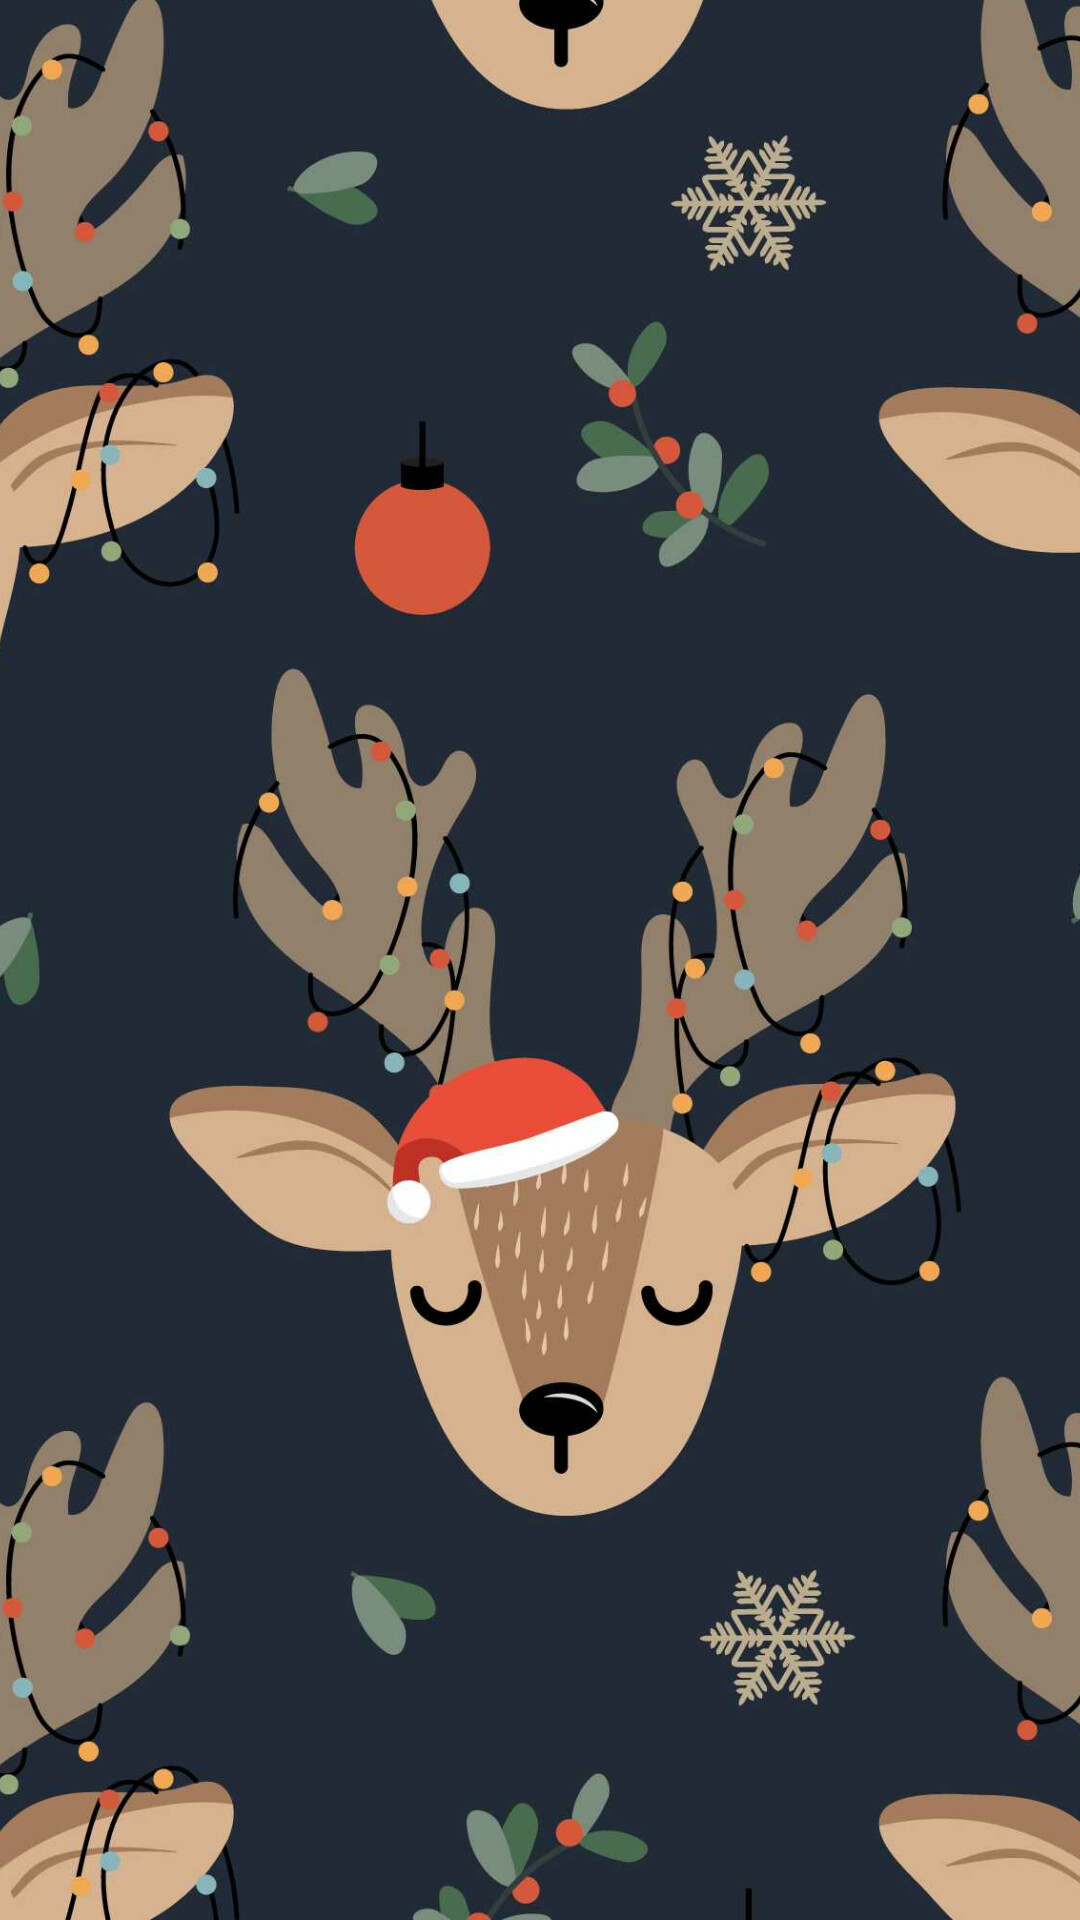 Reindeer: Form an imaginary team, traditionally held to pull the sleigh of Santa Claus. 1080x1920 Full HD Background.